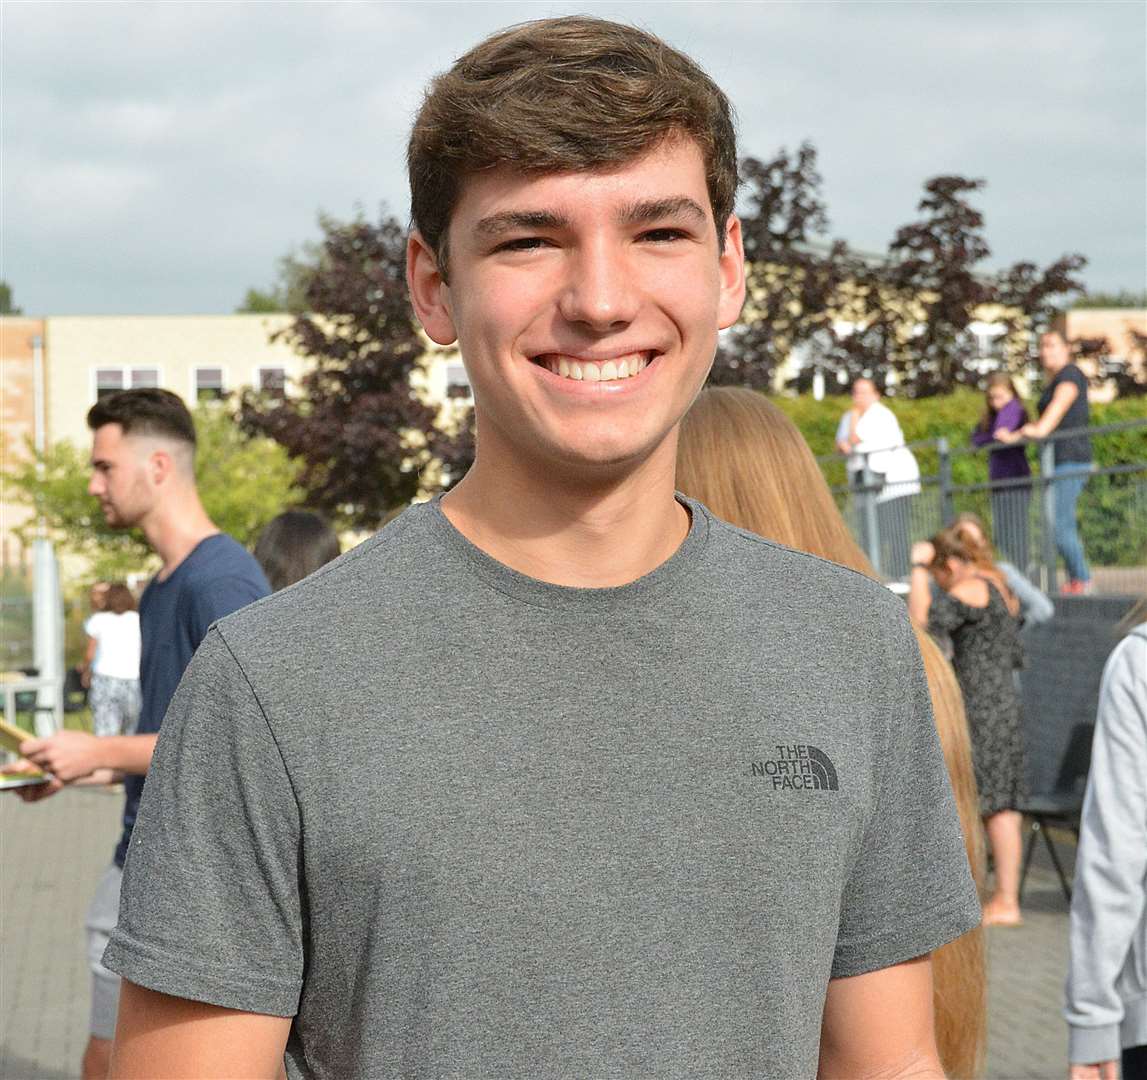 Valley Park student Hugo Chaussy seemed pleased with his results